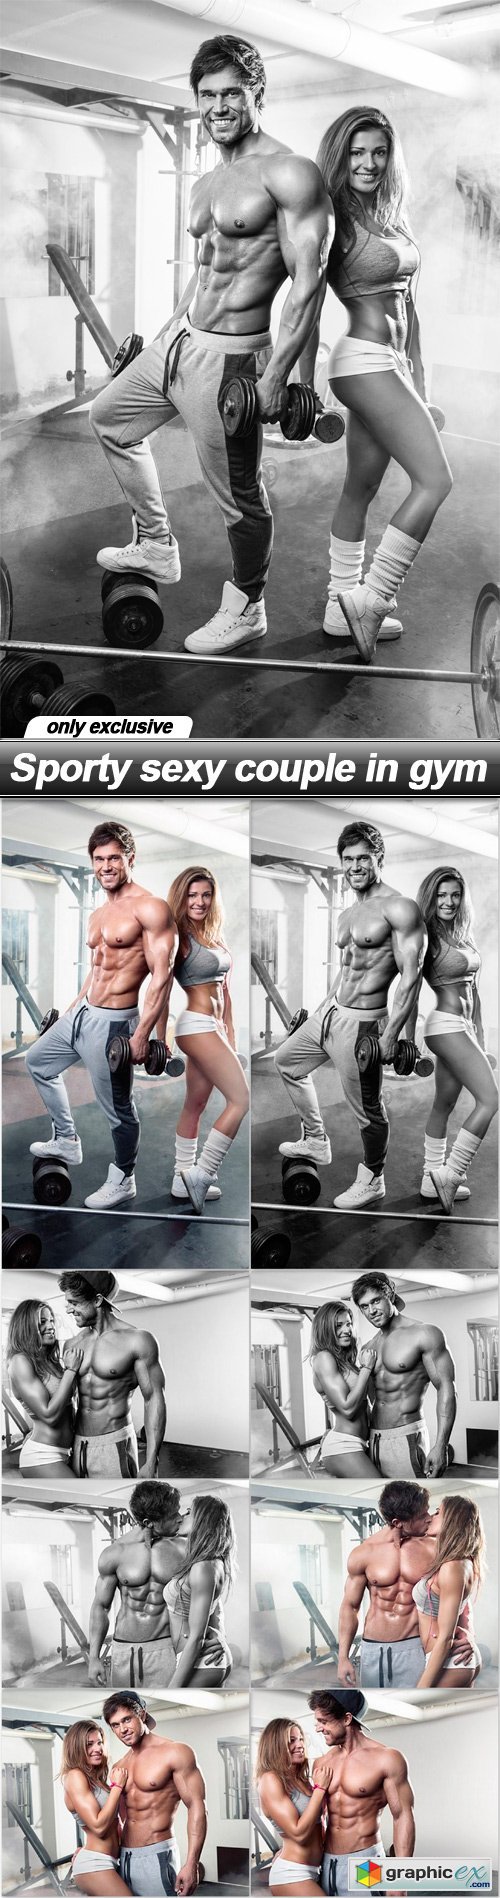 Sporty sexy couple in gym - 8 UHQ JPEG